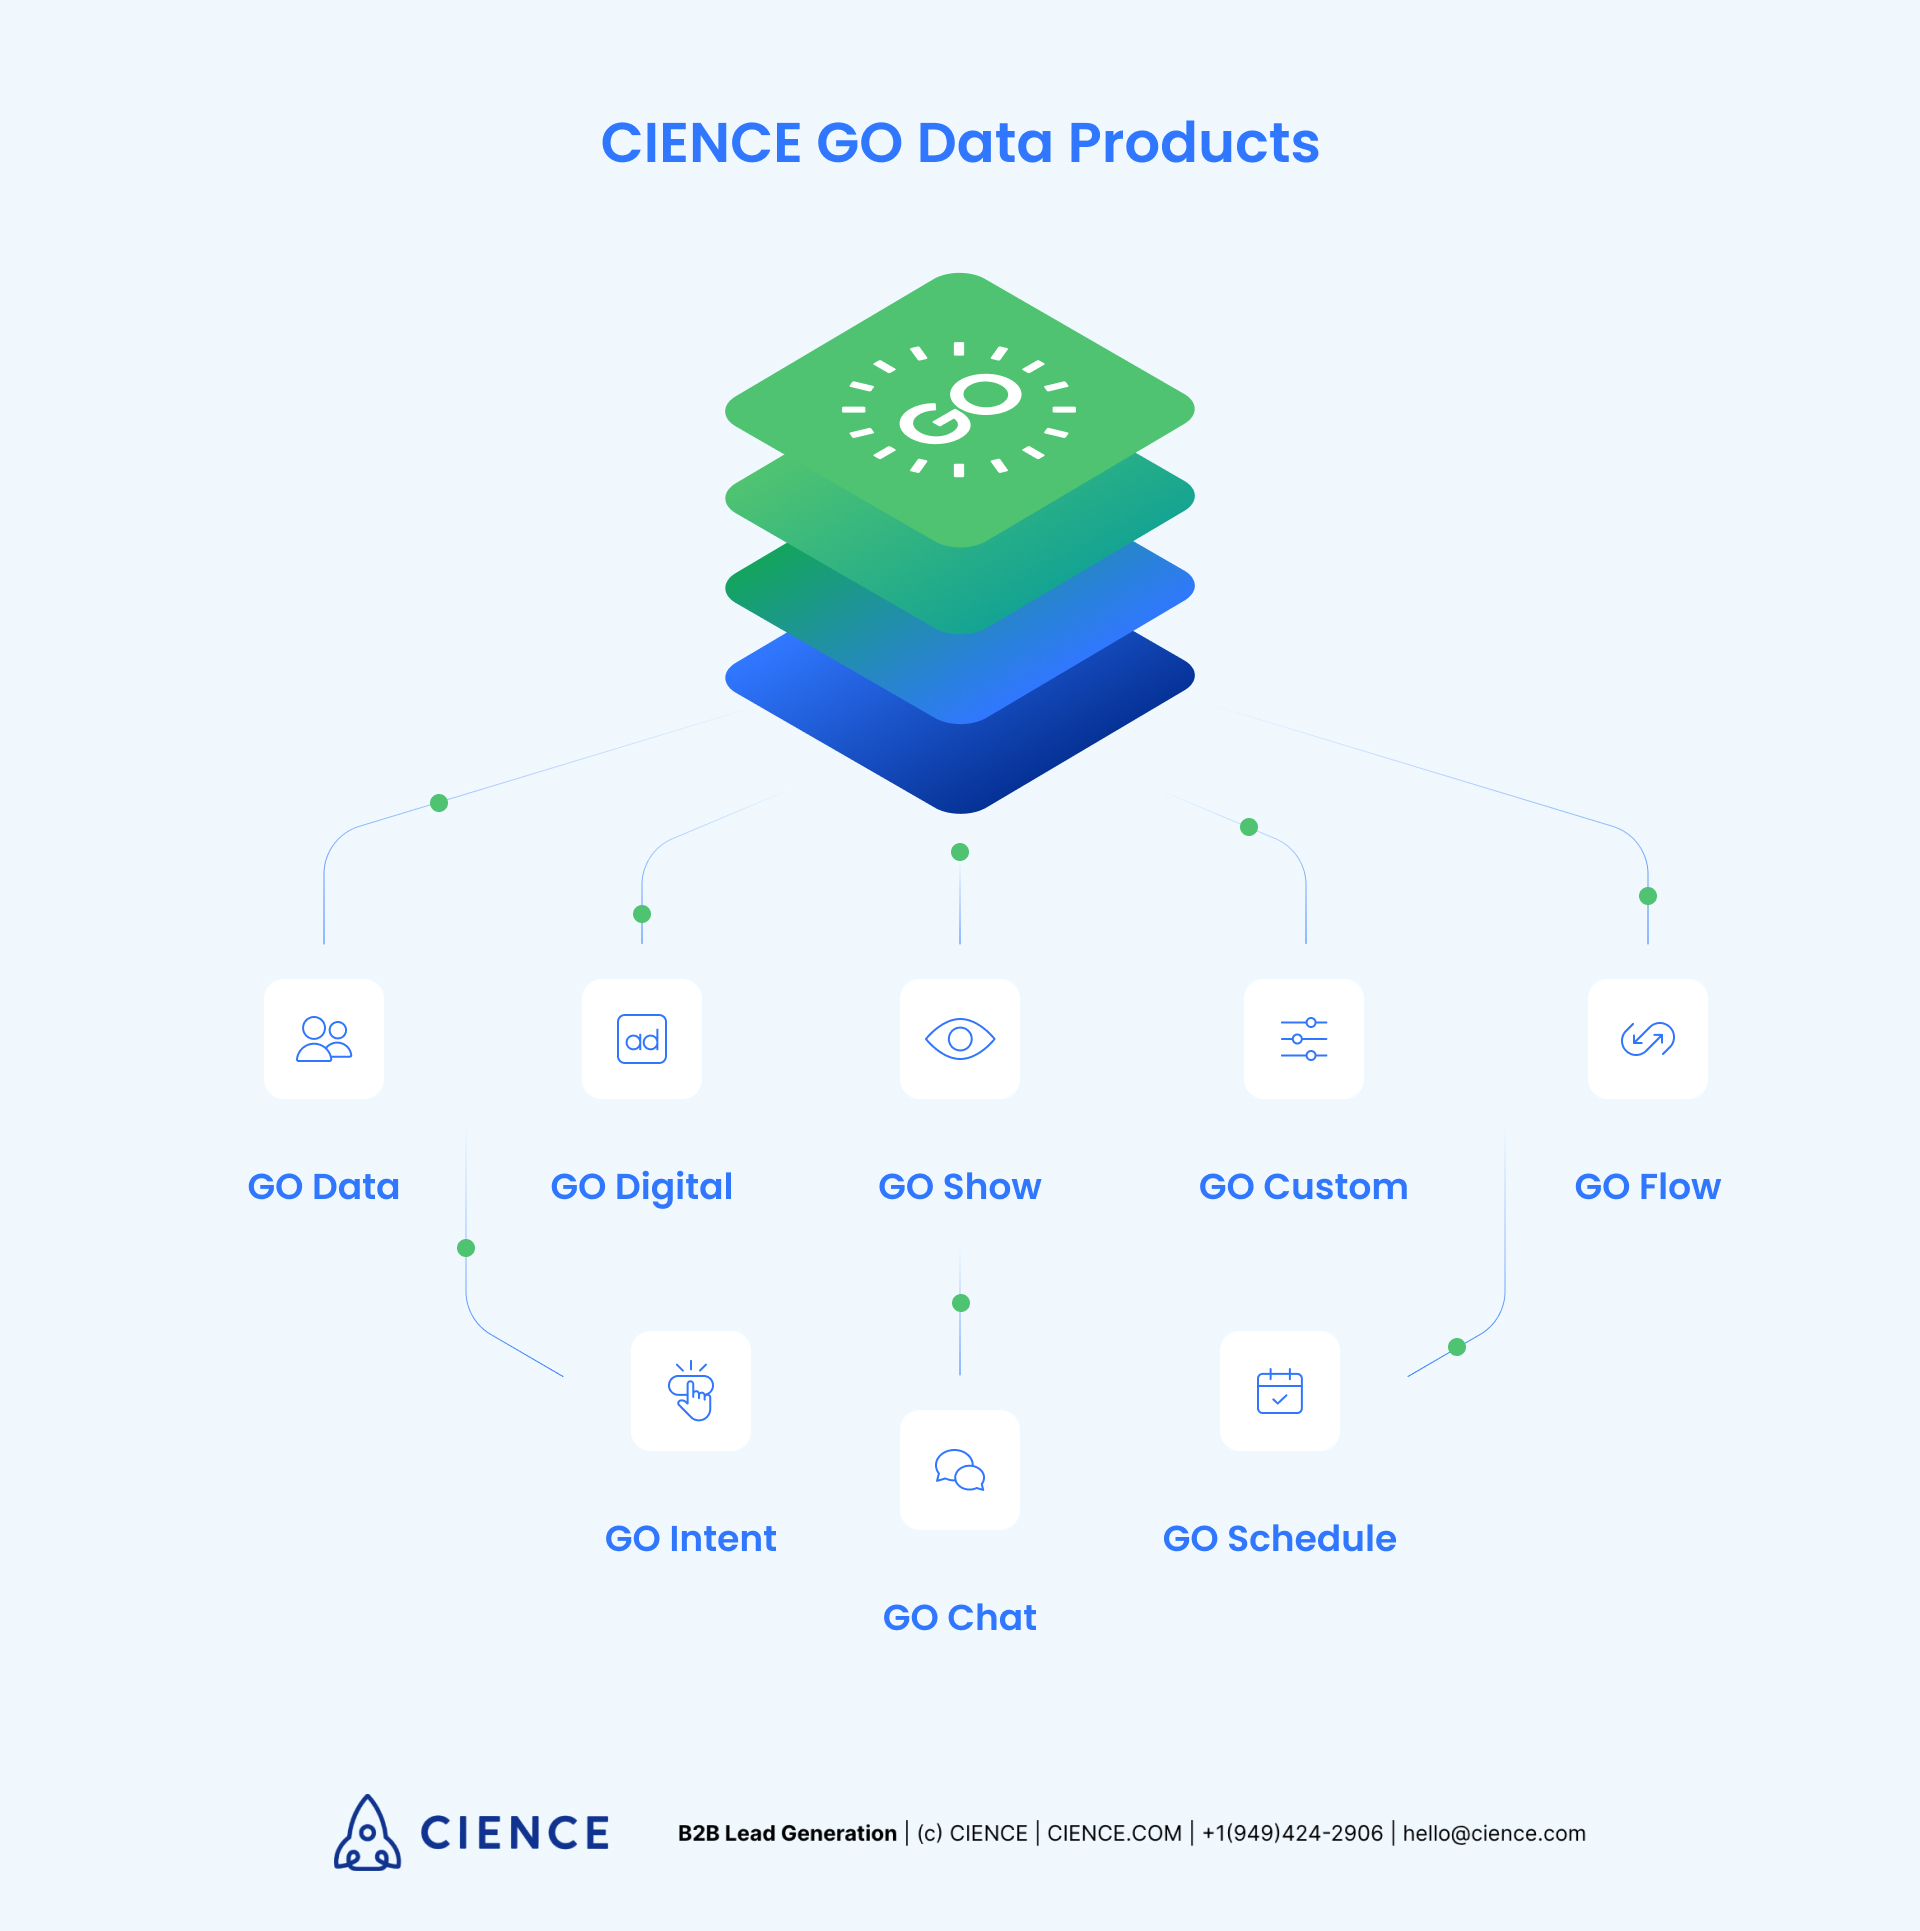 CIENCE GO Data Products